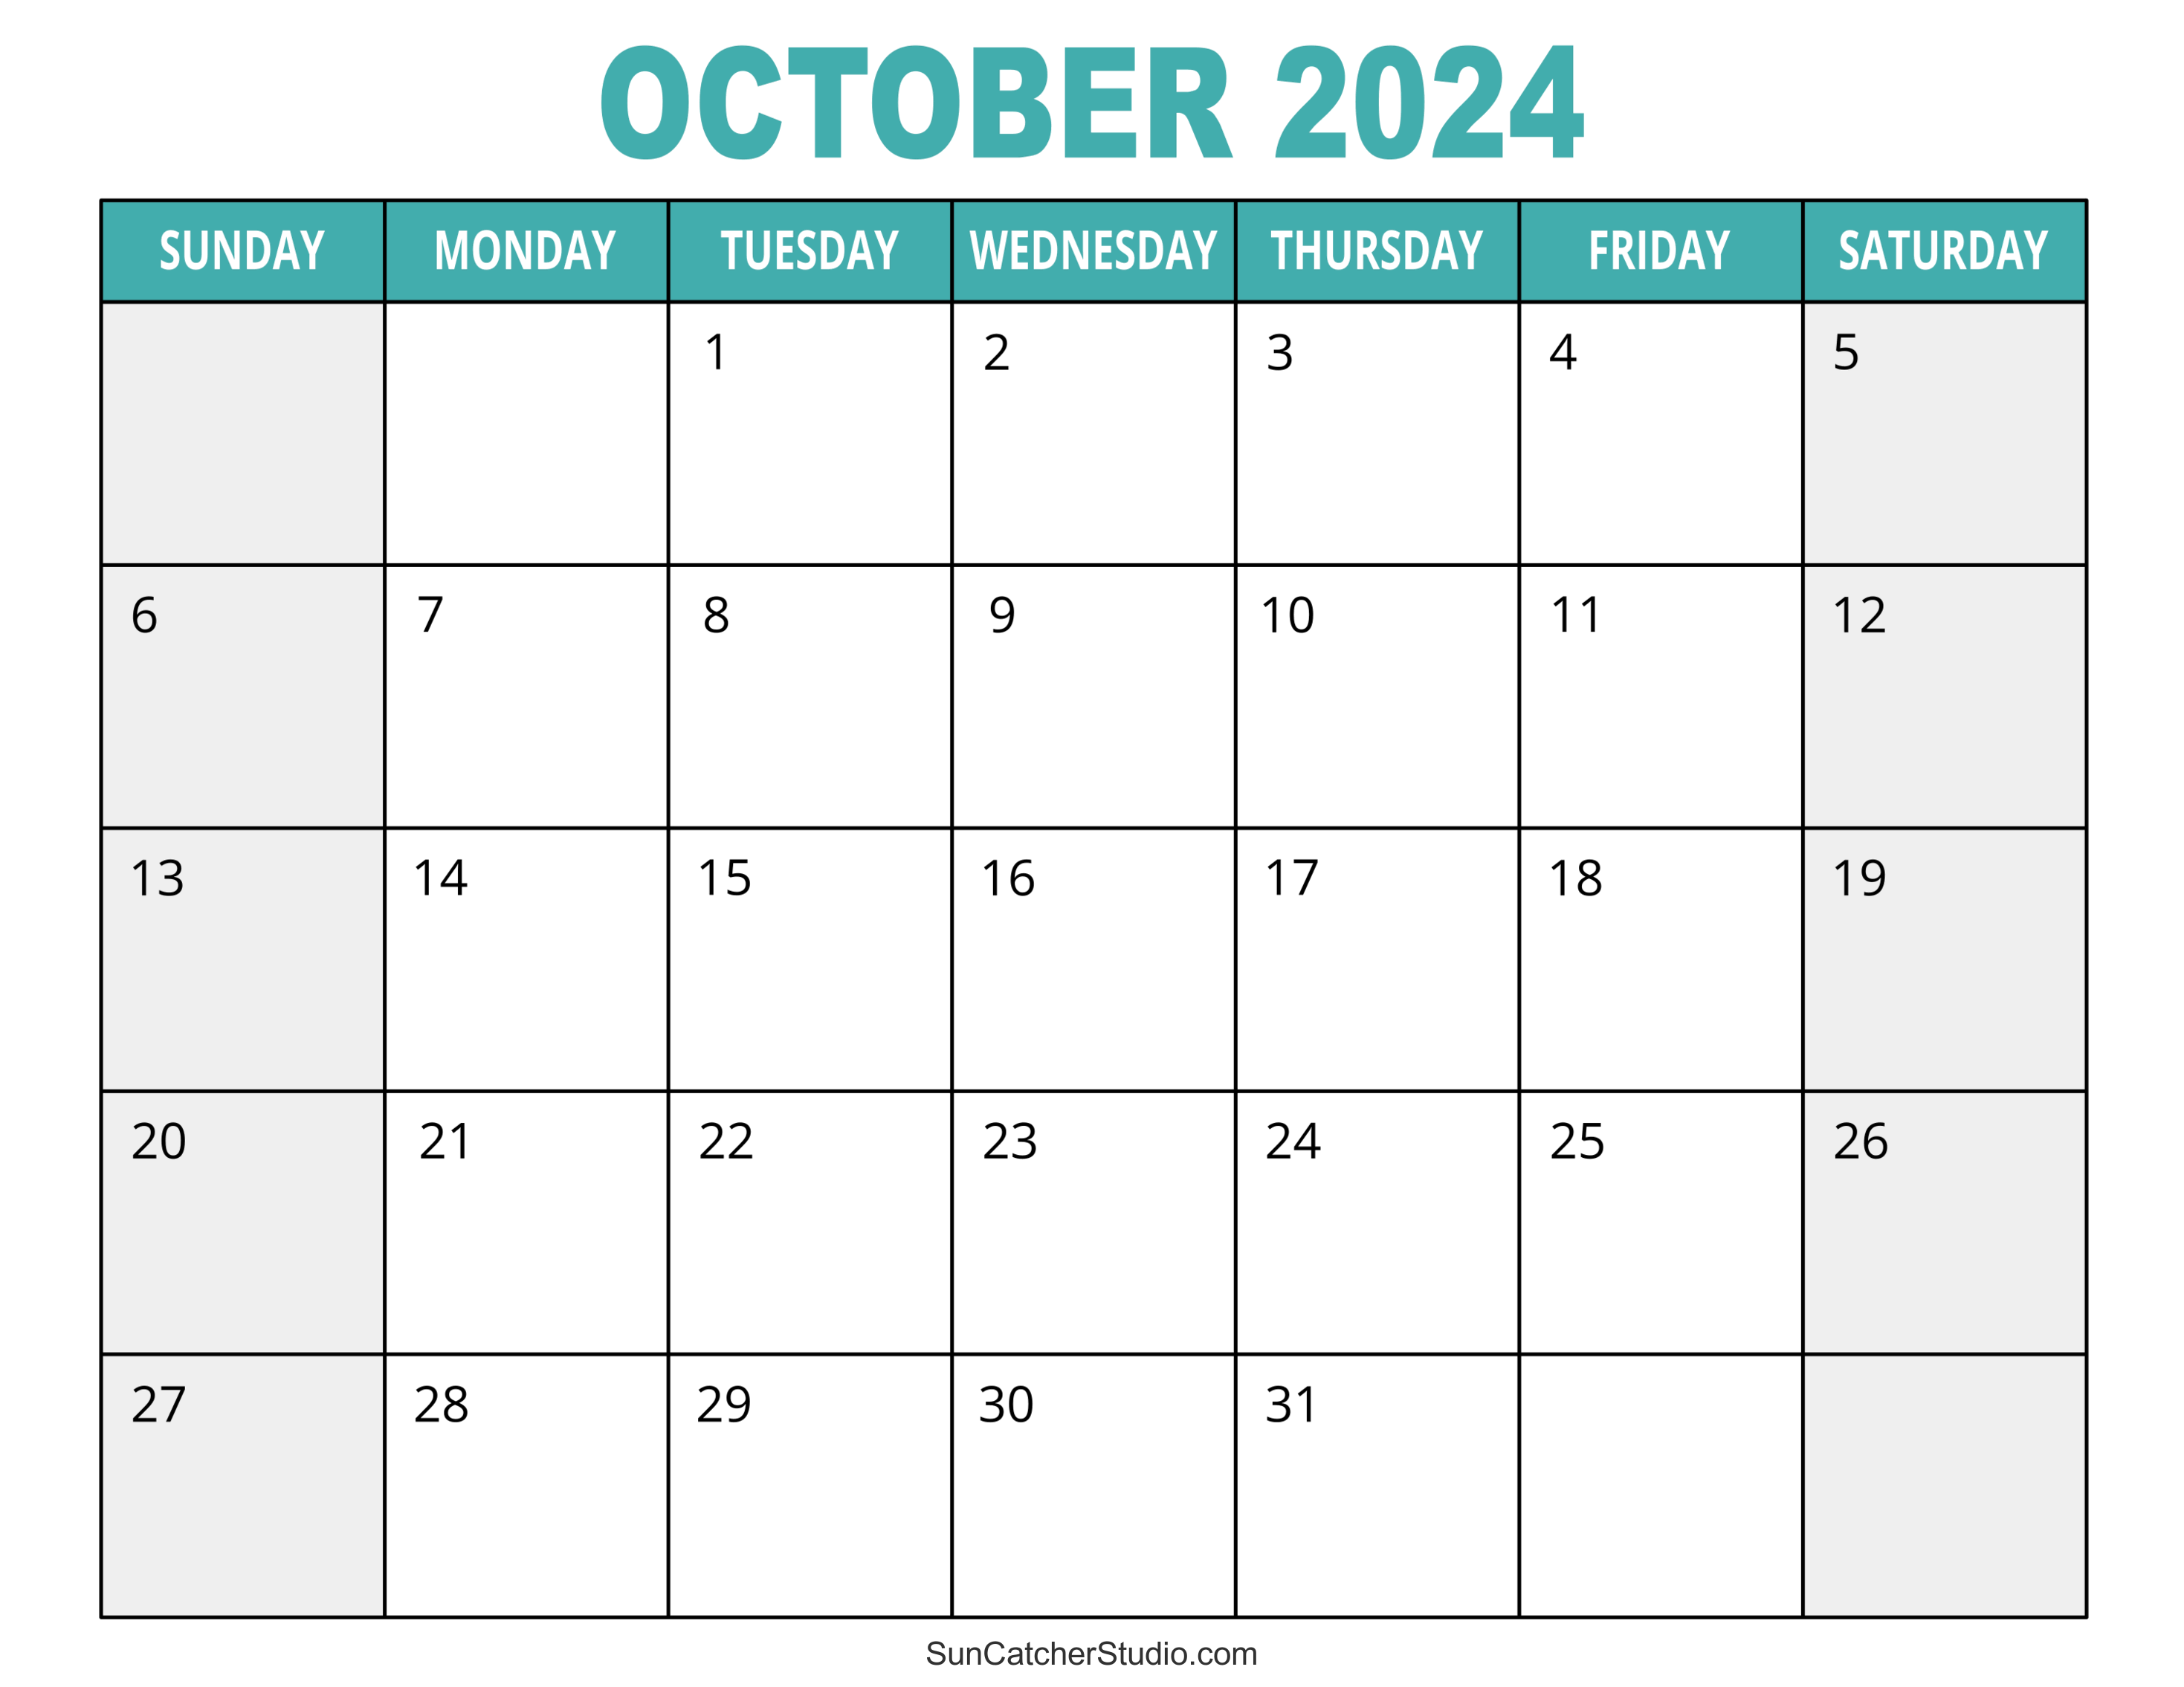 October 2024 Calendar (Free Printable) DIY Projects, Patterns